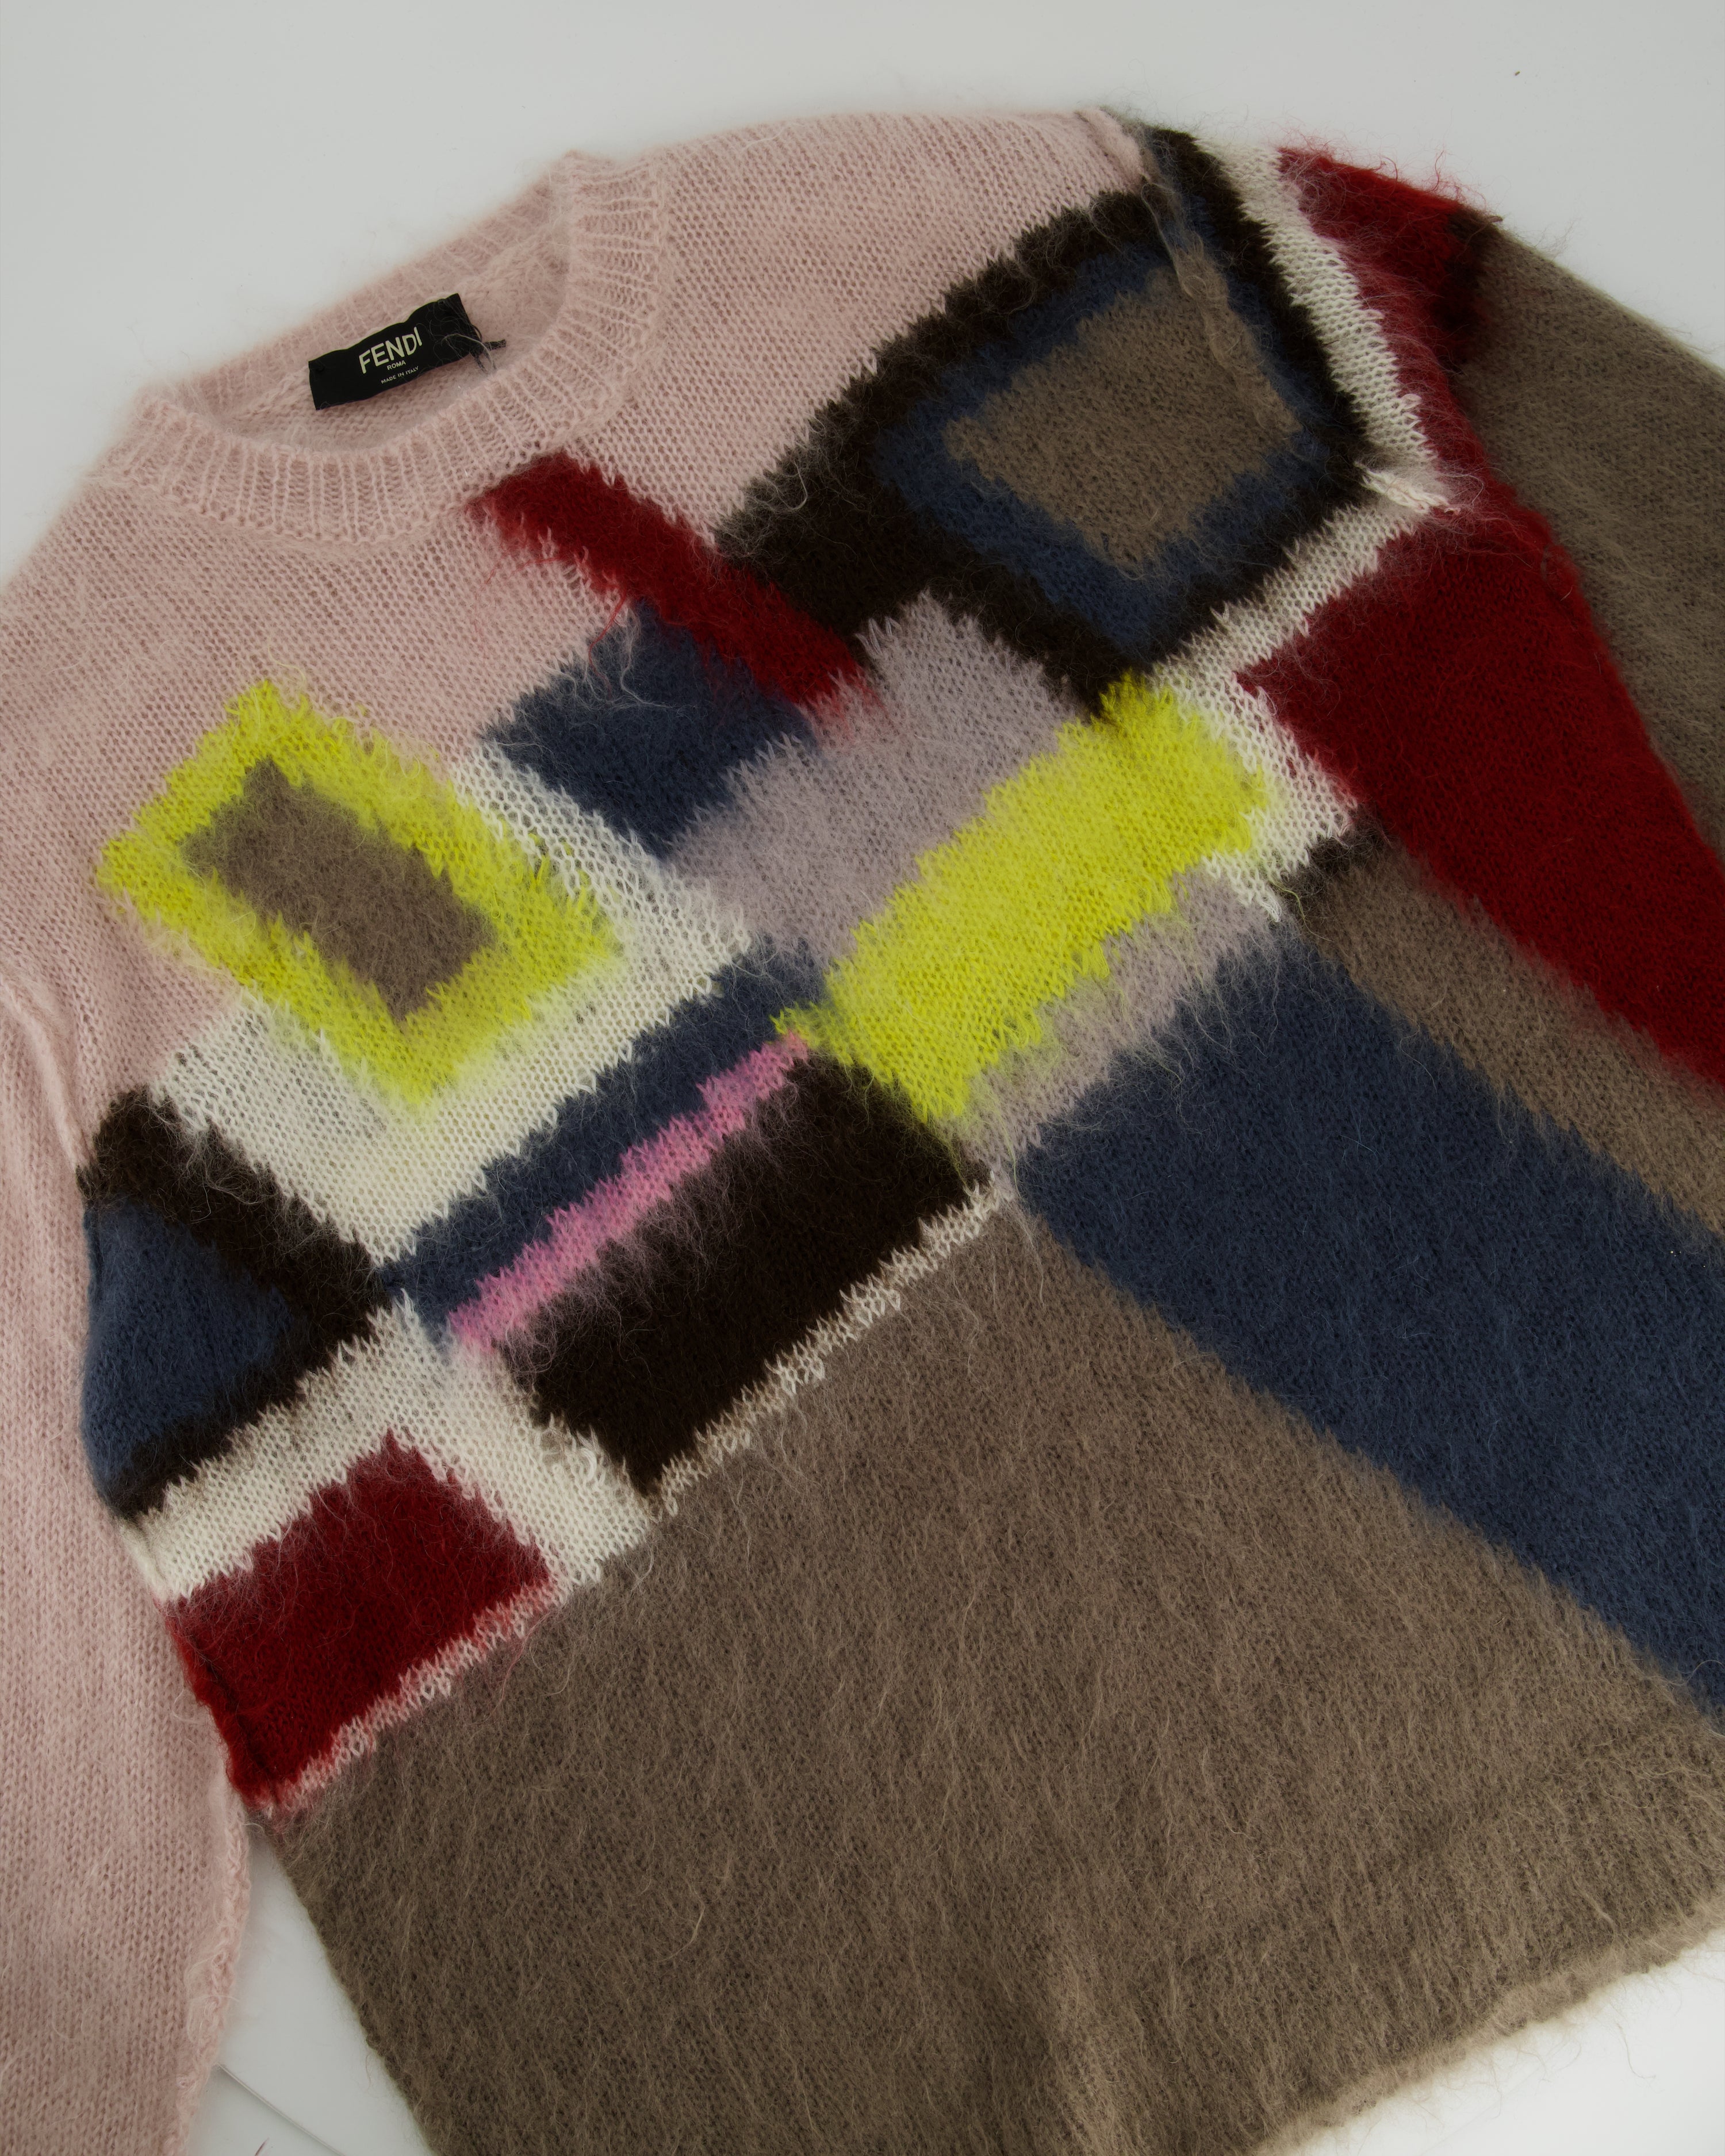 NEW SWEATER LOUIS VUITTON M 48 IN MOHAIR AND RED WOOL NEW WOOL